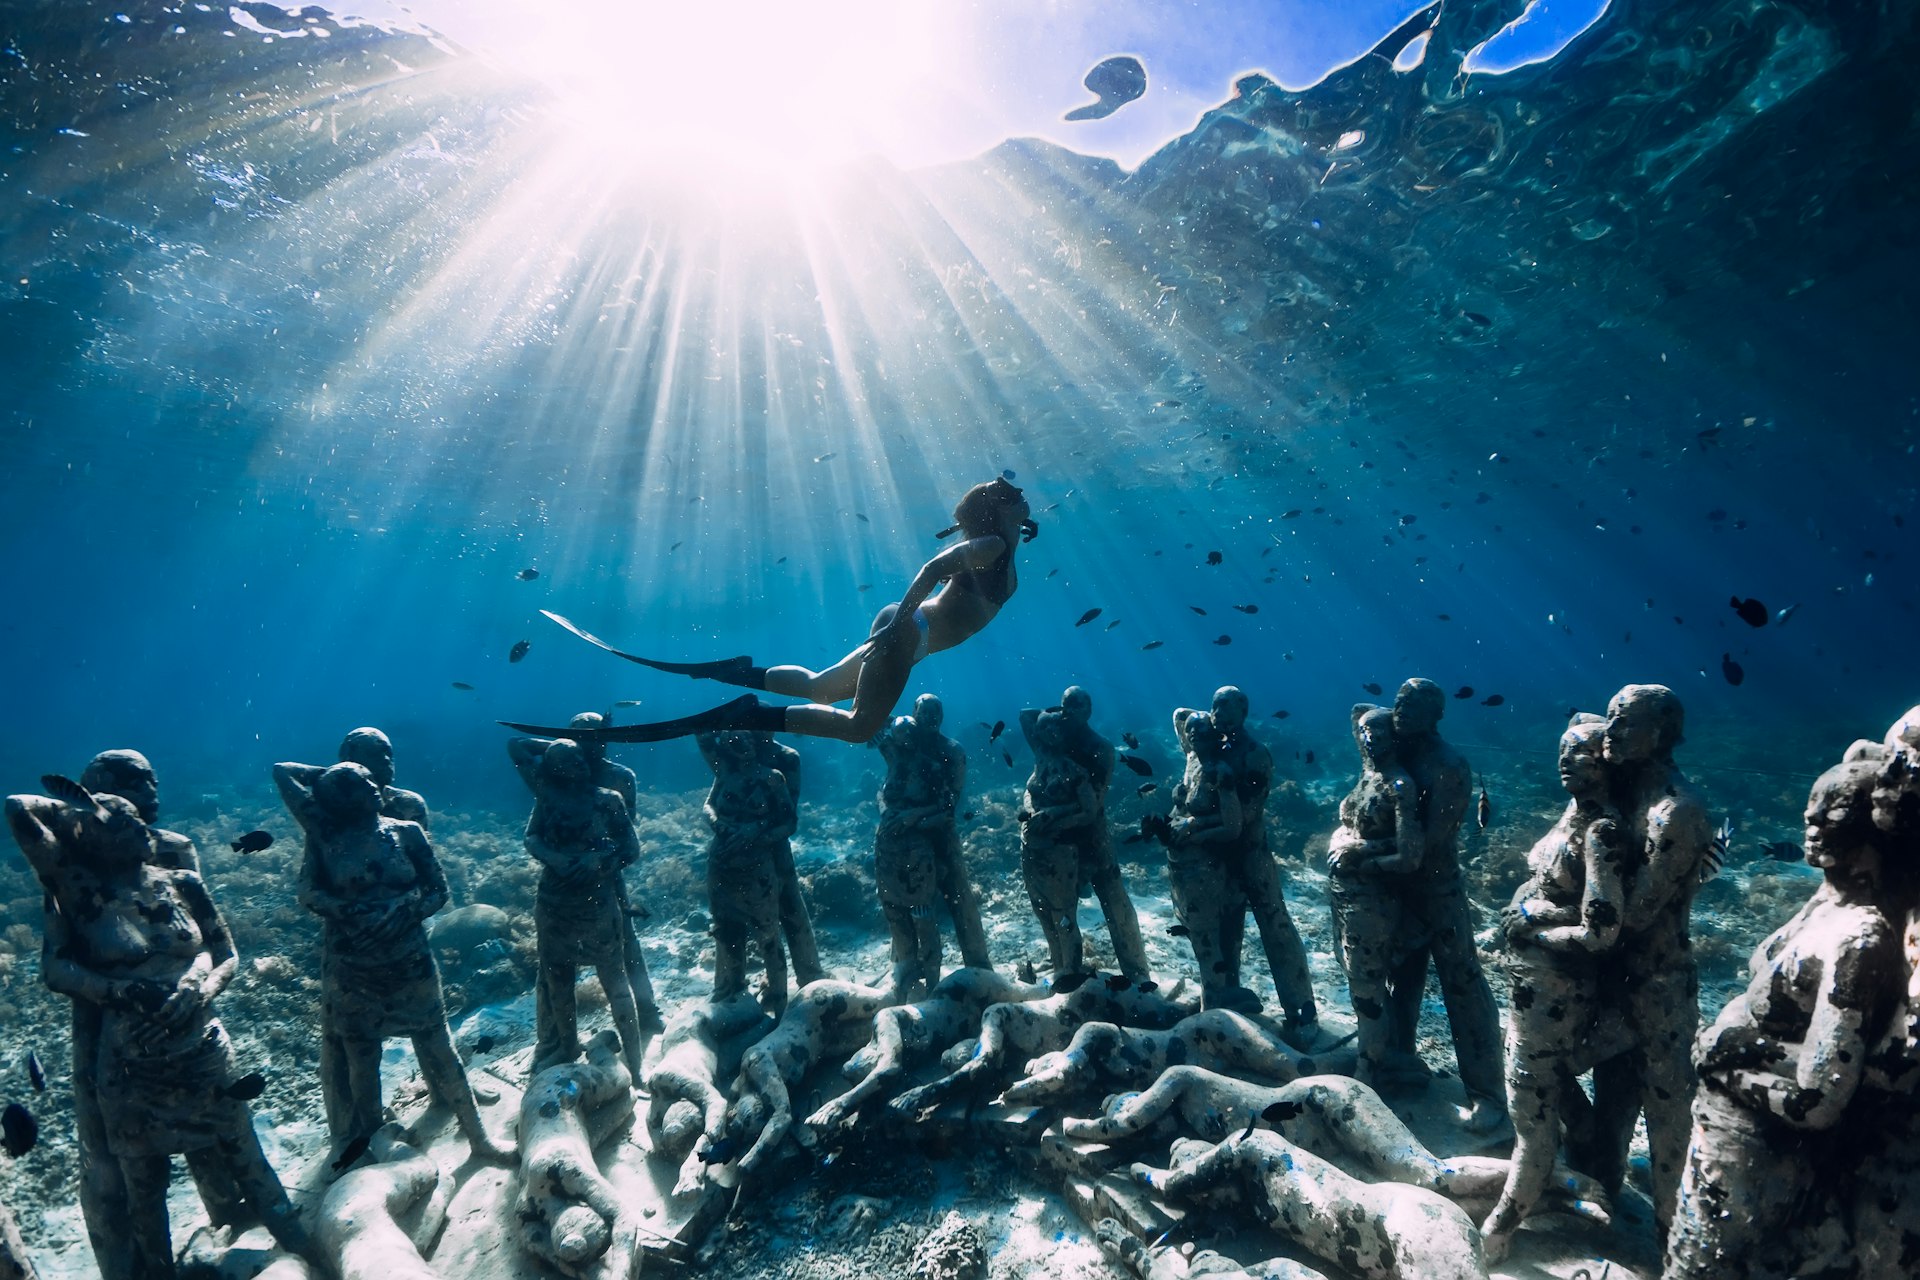  Woman freediver with fins dive near underwater statues. Underwater tourism in the ocean.